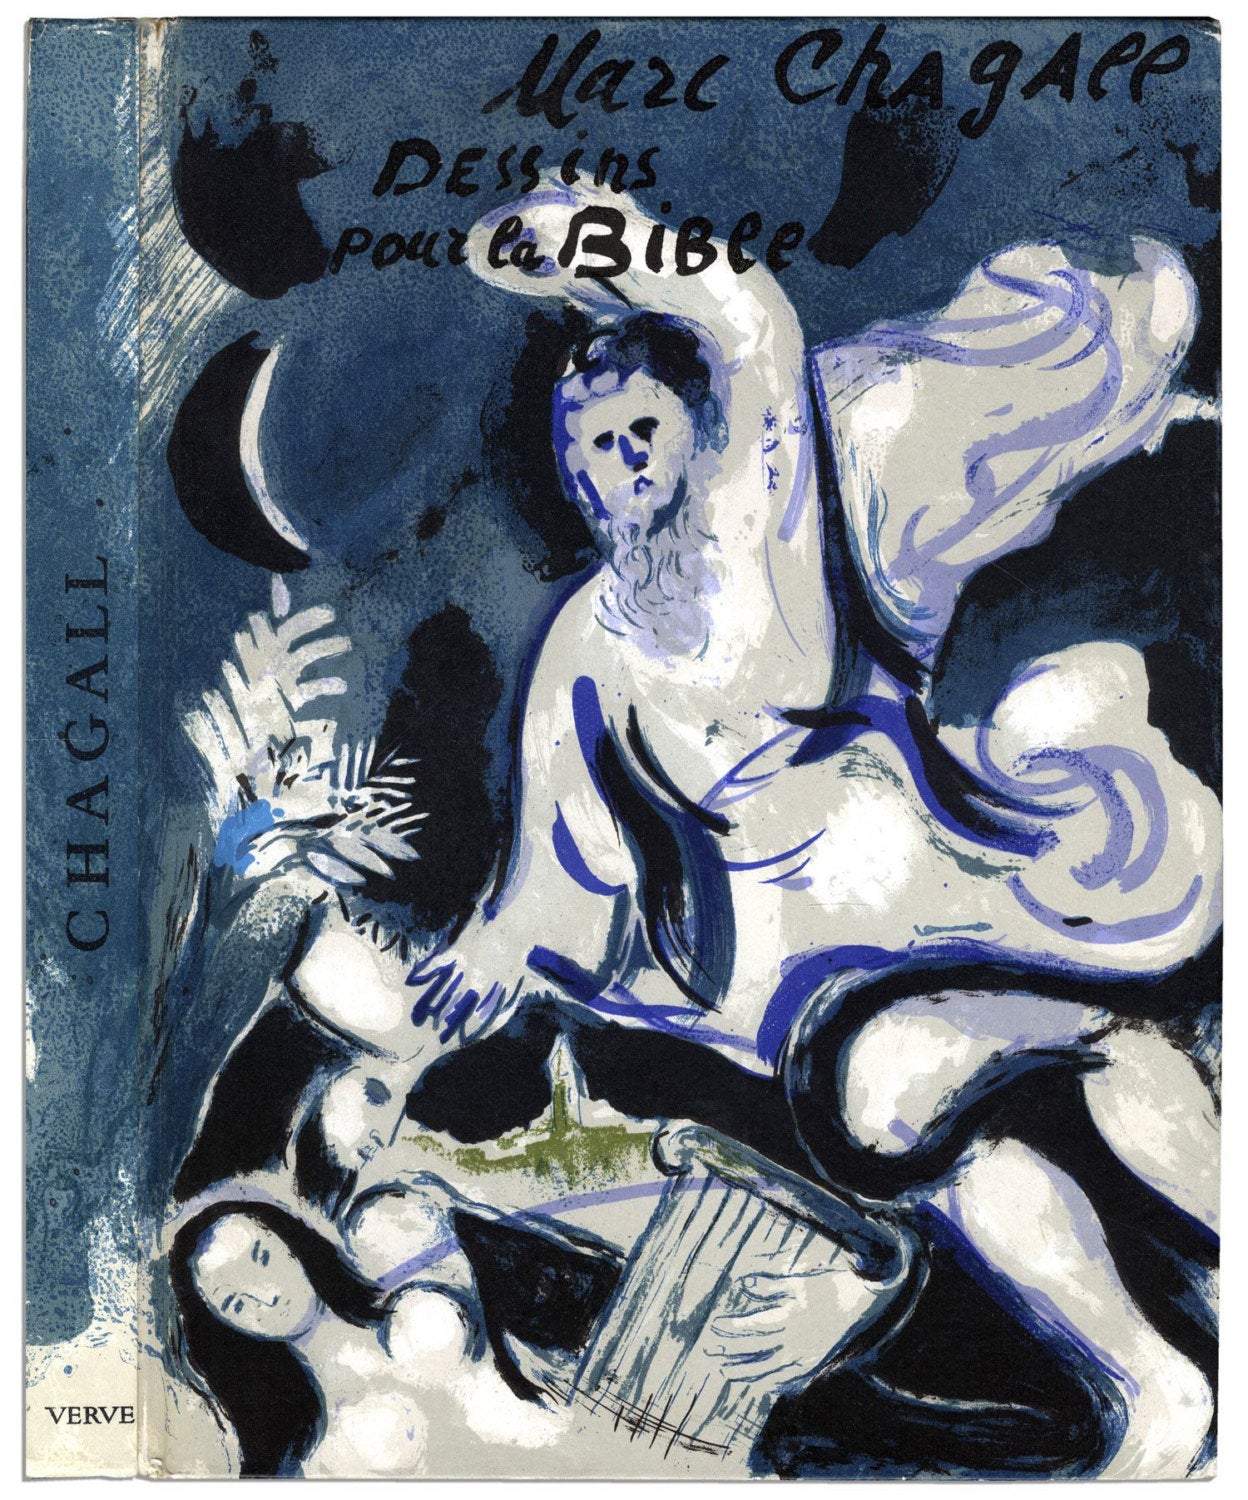 Book, Drawings for the Bible 1960, Revue VerBook Chagall, Drawings for the Bible, Verve 37-38